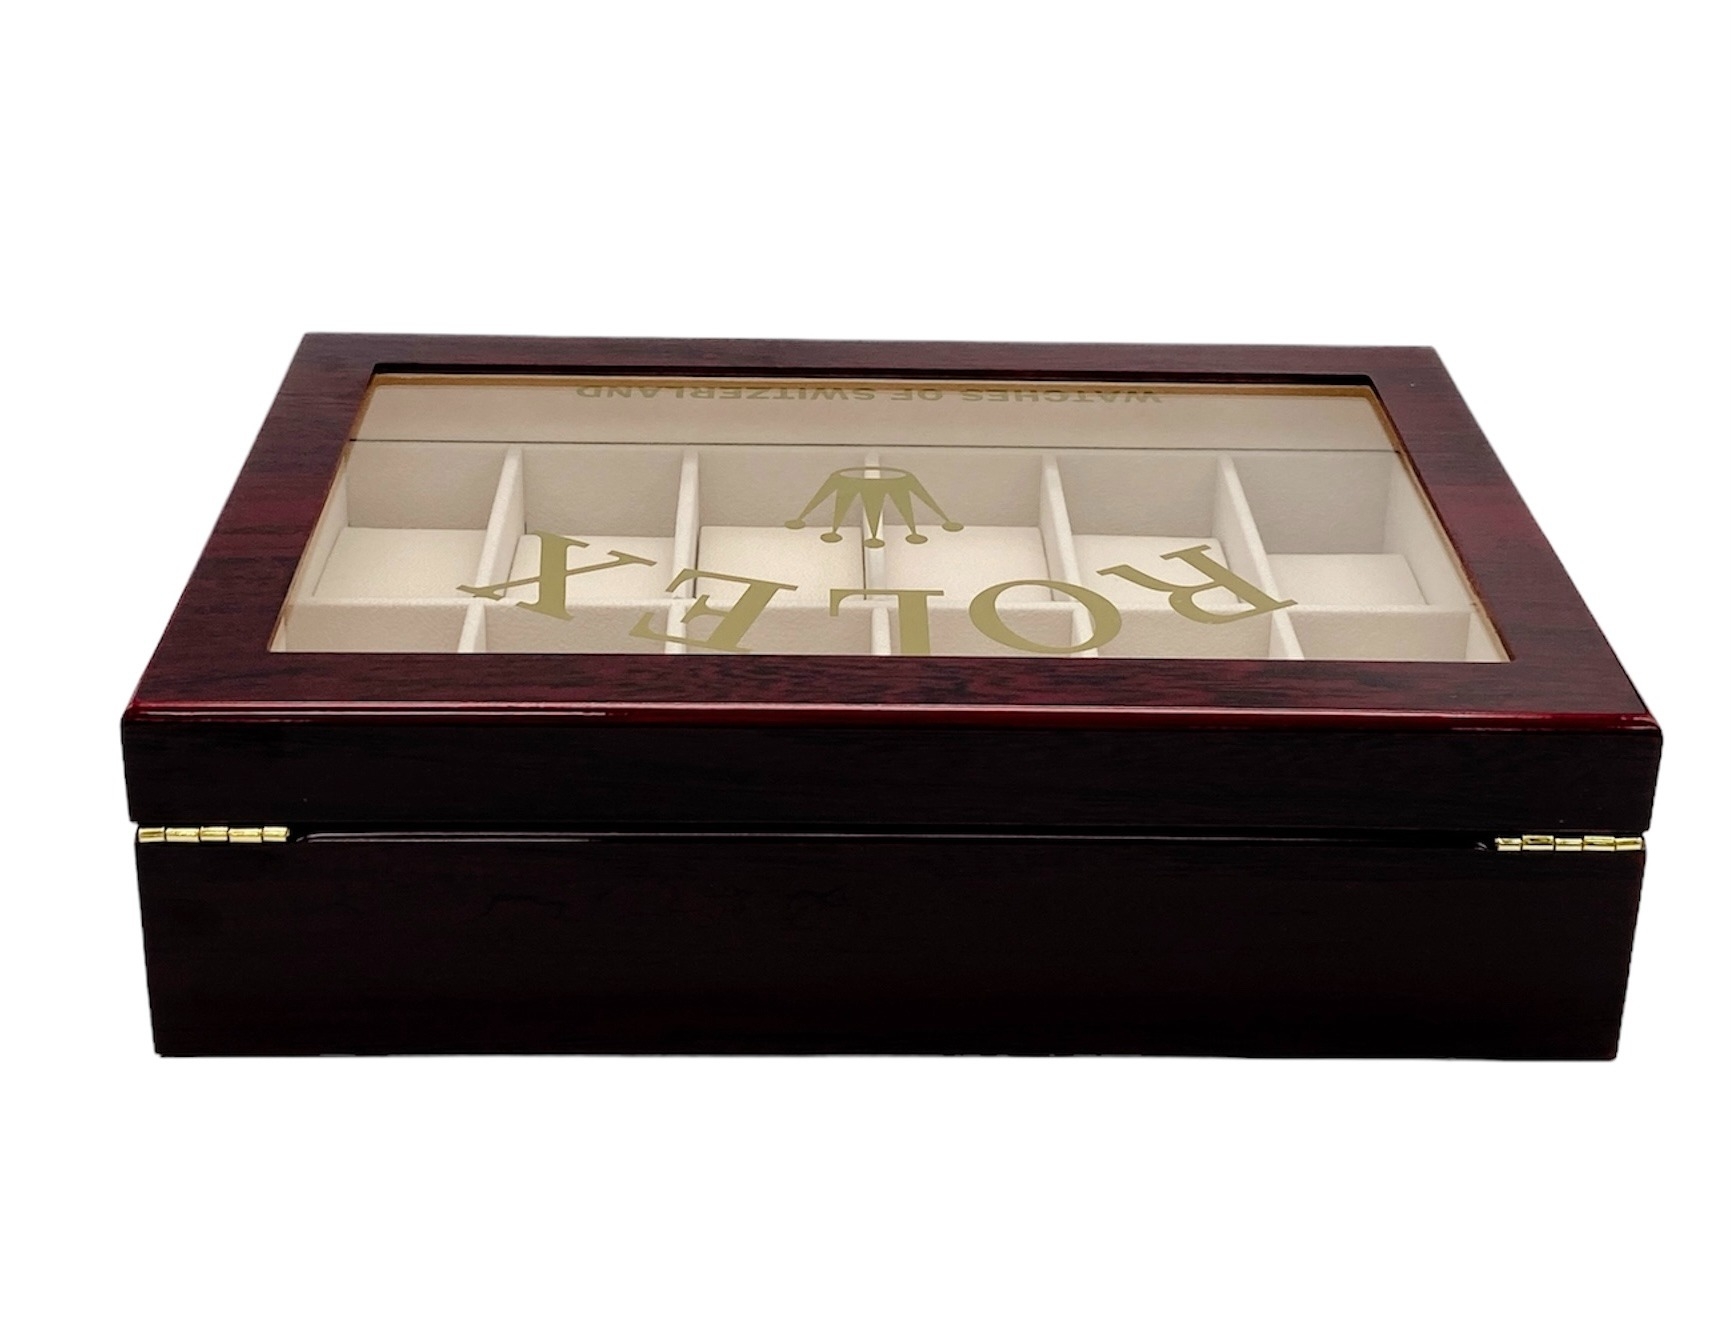 An Unused 12 Watch Display Case. Perfect for Rolex watches. 31.5 x 21.5 x 8.5cm. Rich Piano Finish. - Image 10 of 12